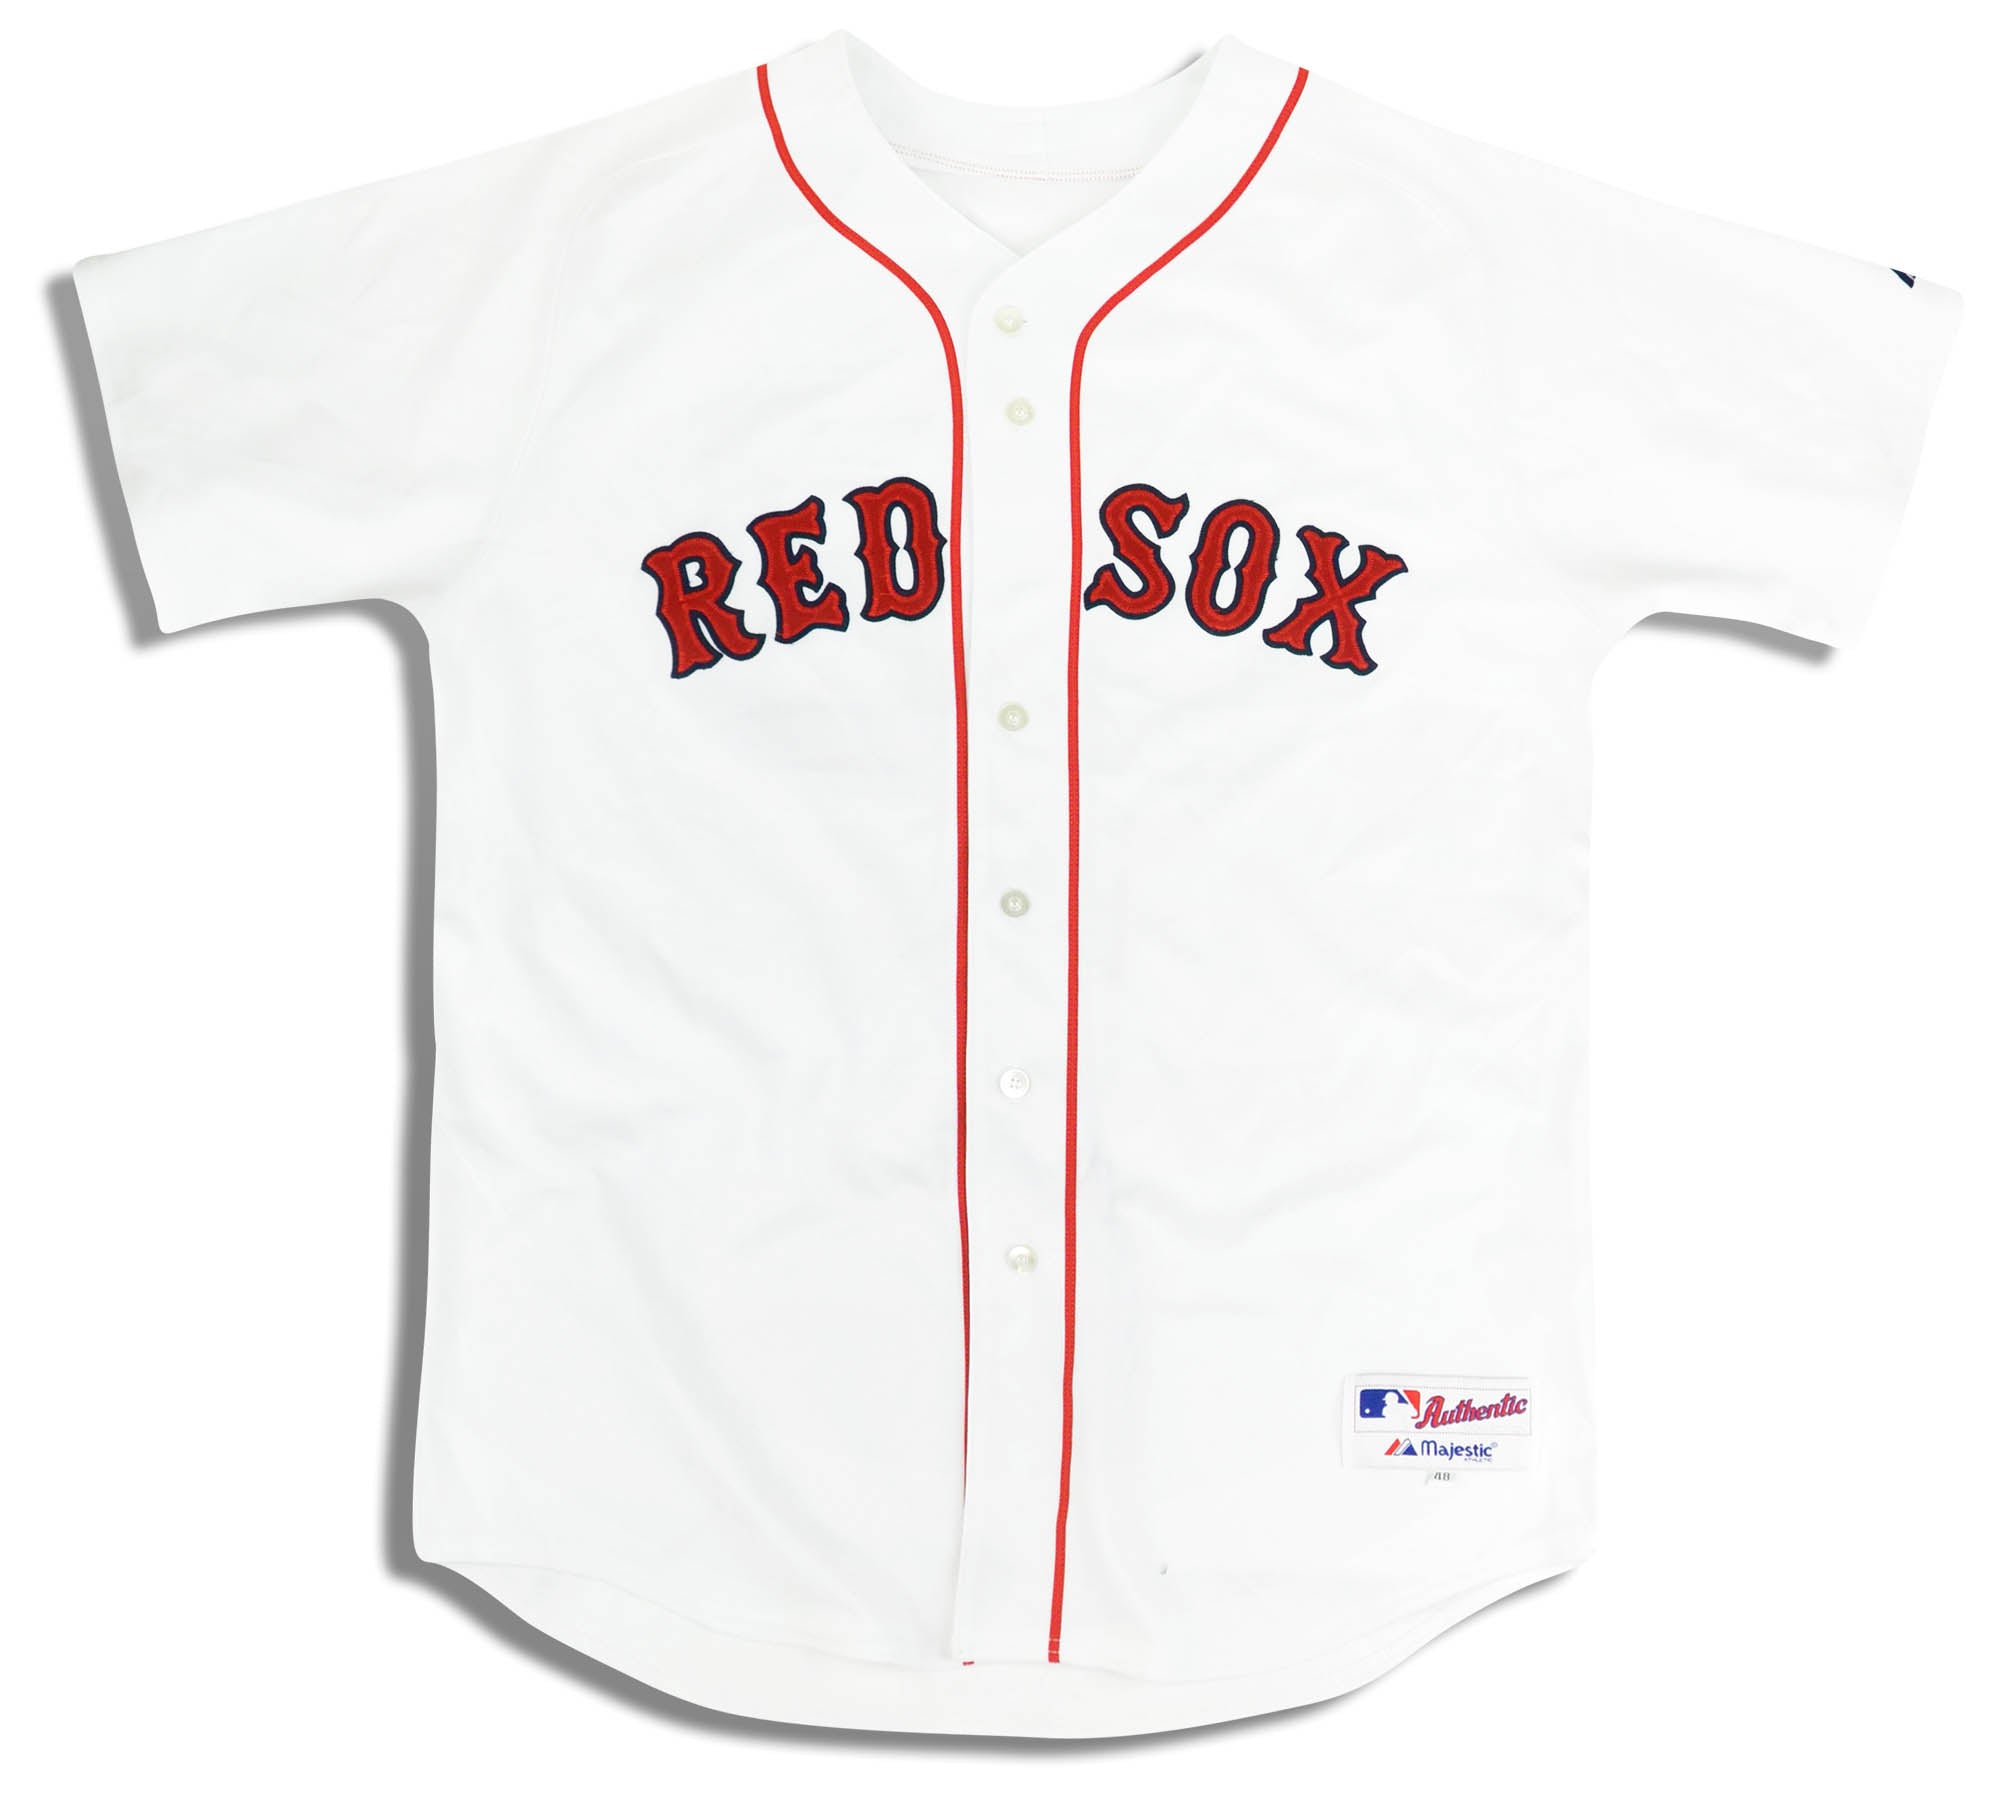 Boston Red Sox Majestic Coolbase Authentic Jersey 48 MLB